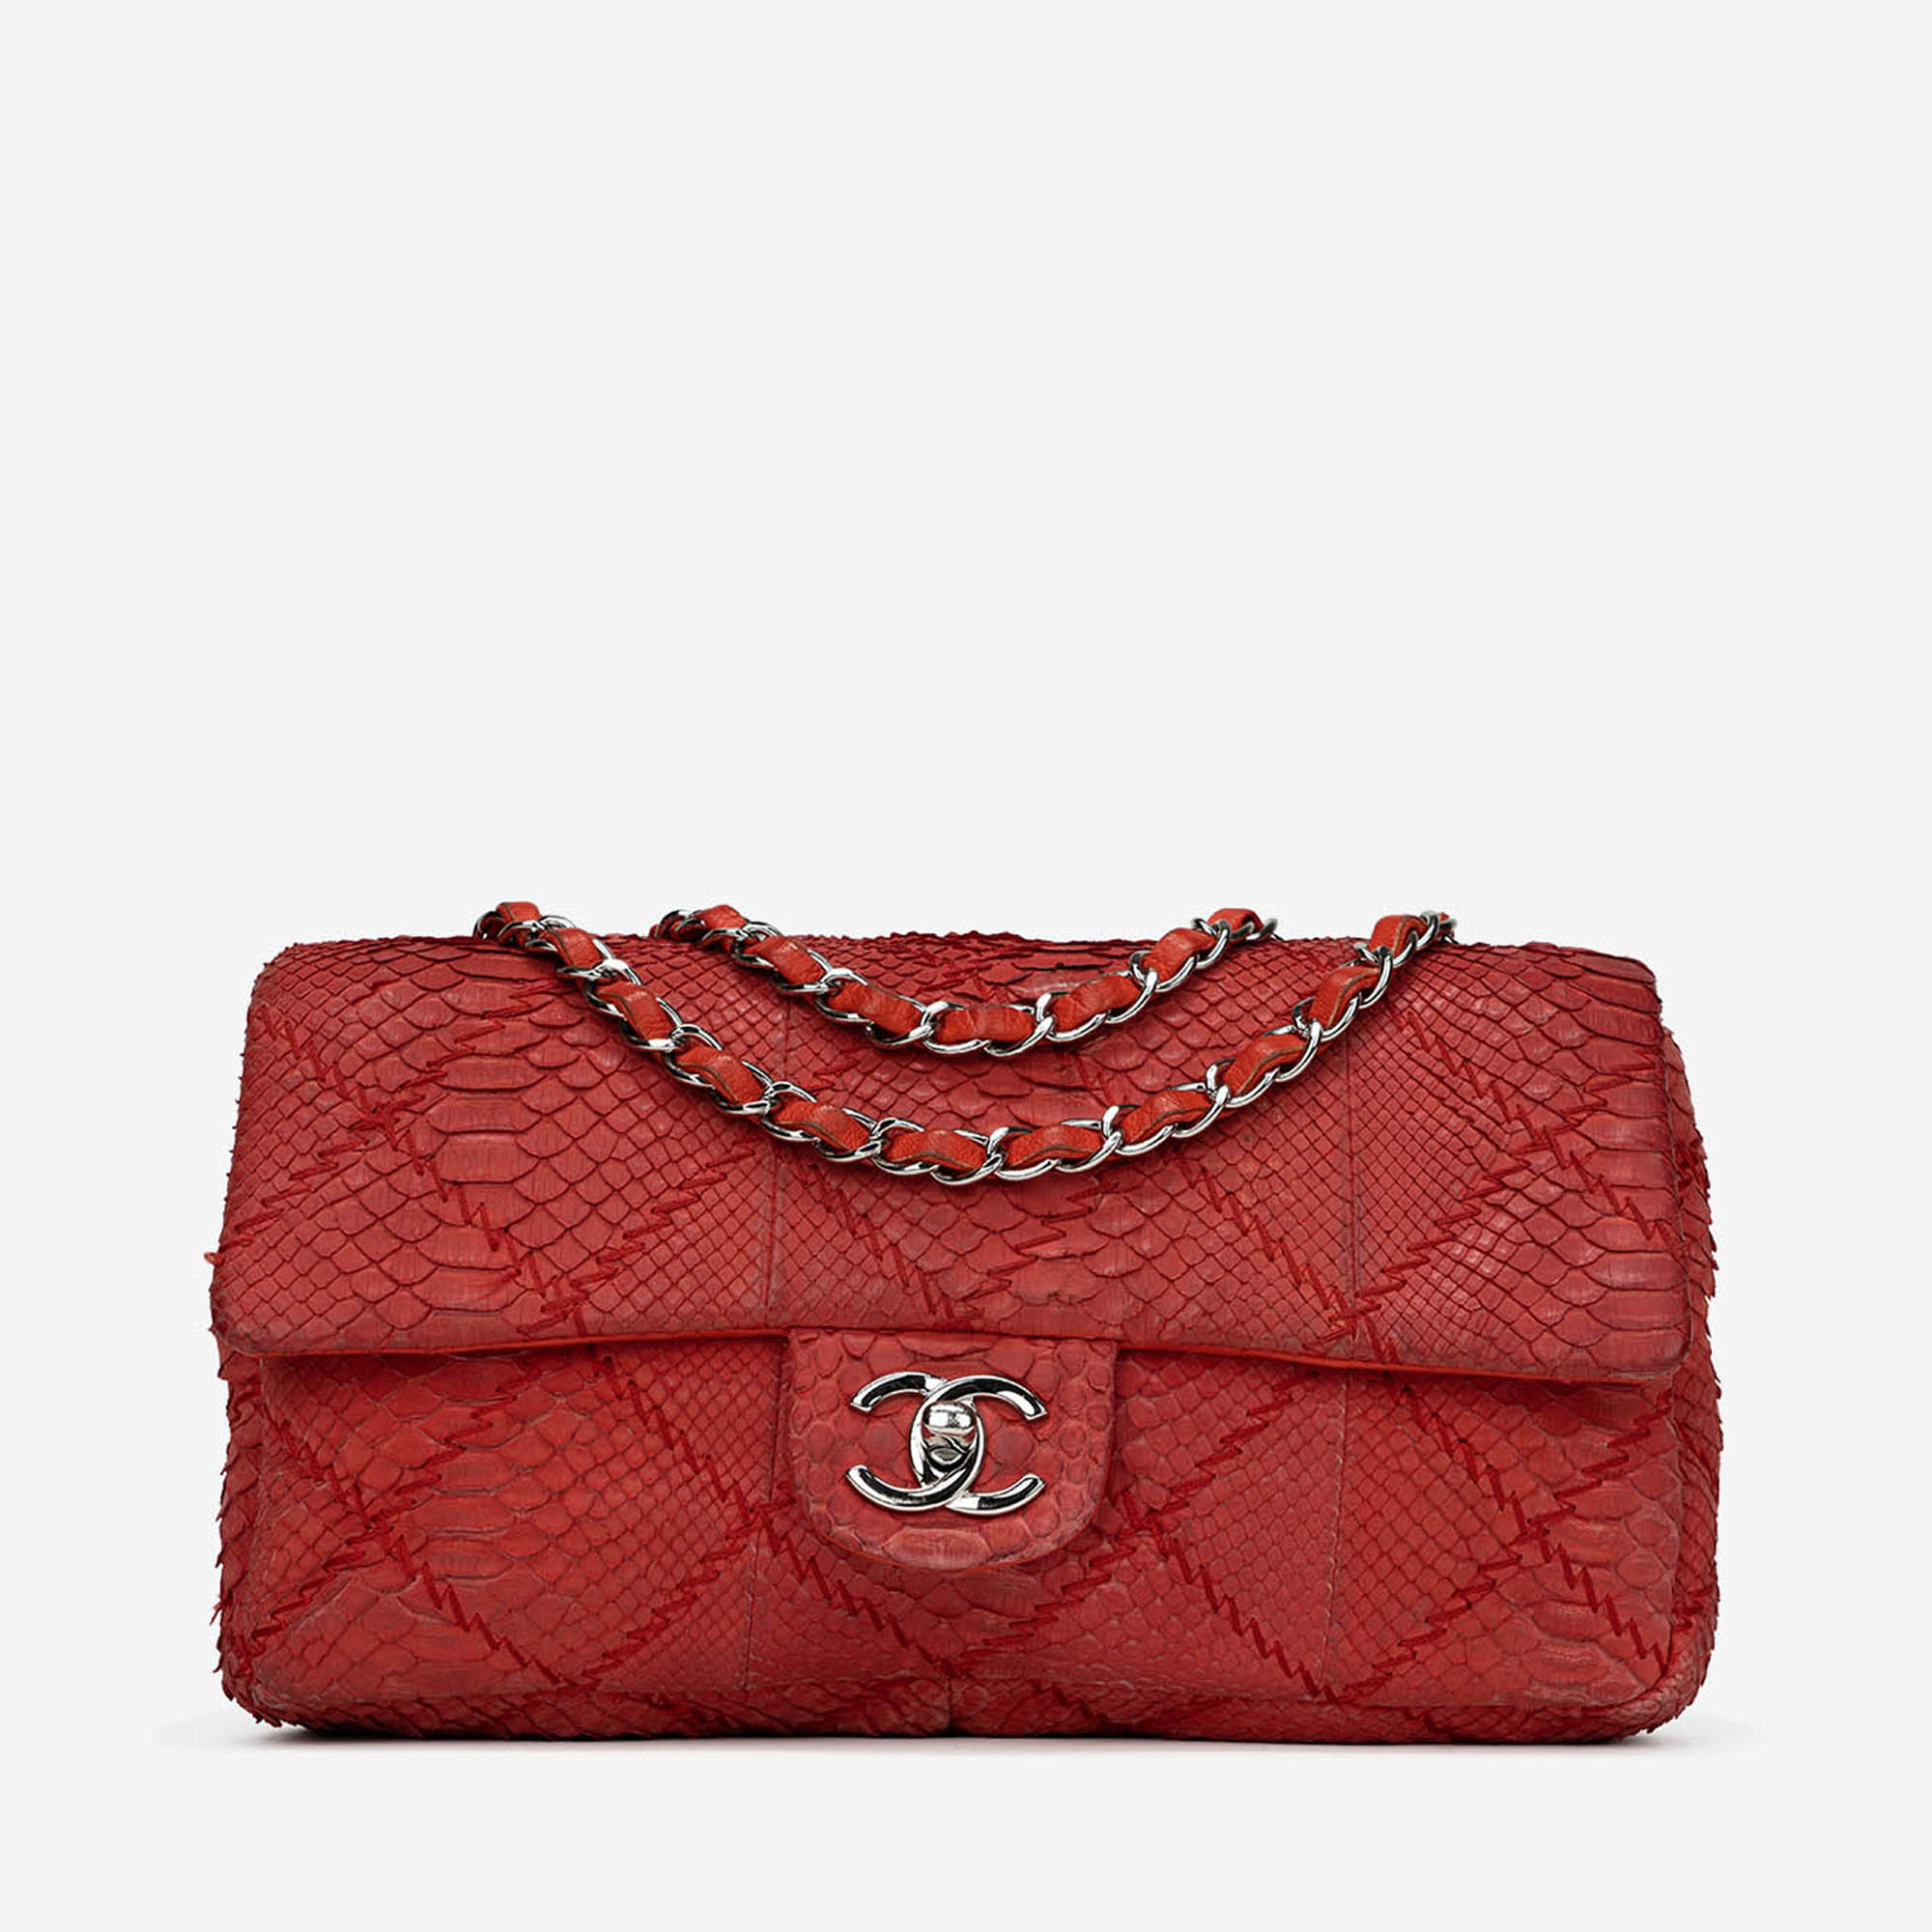 Chanel Snakeskin Medium Double Flap Red